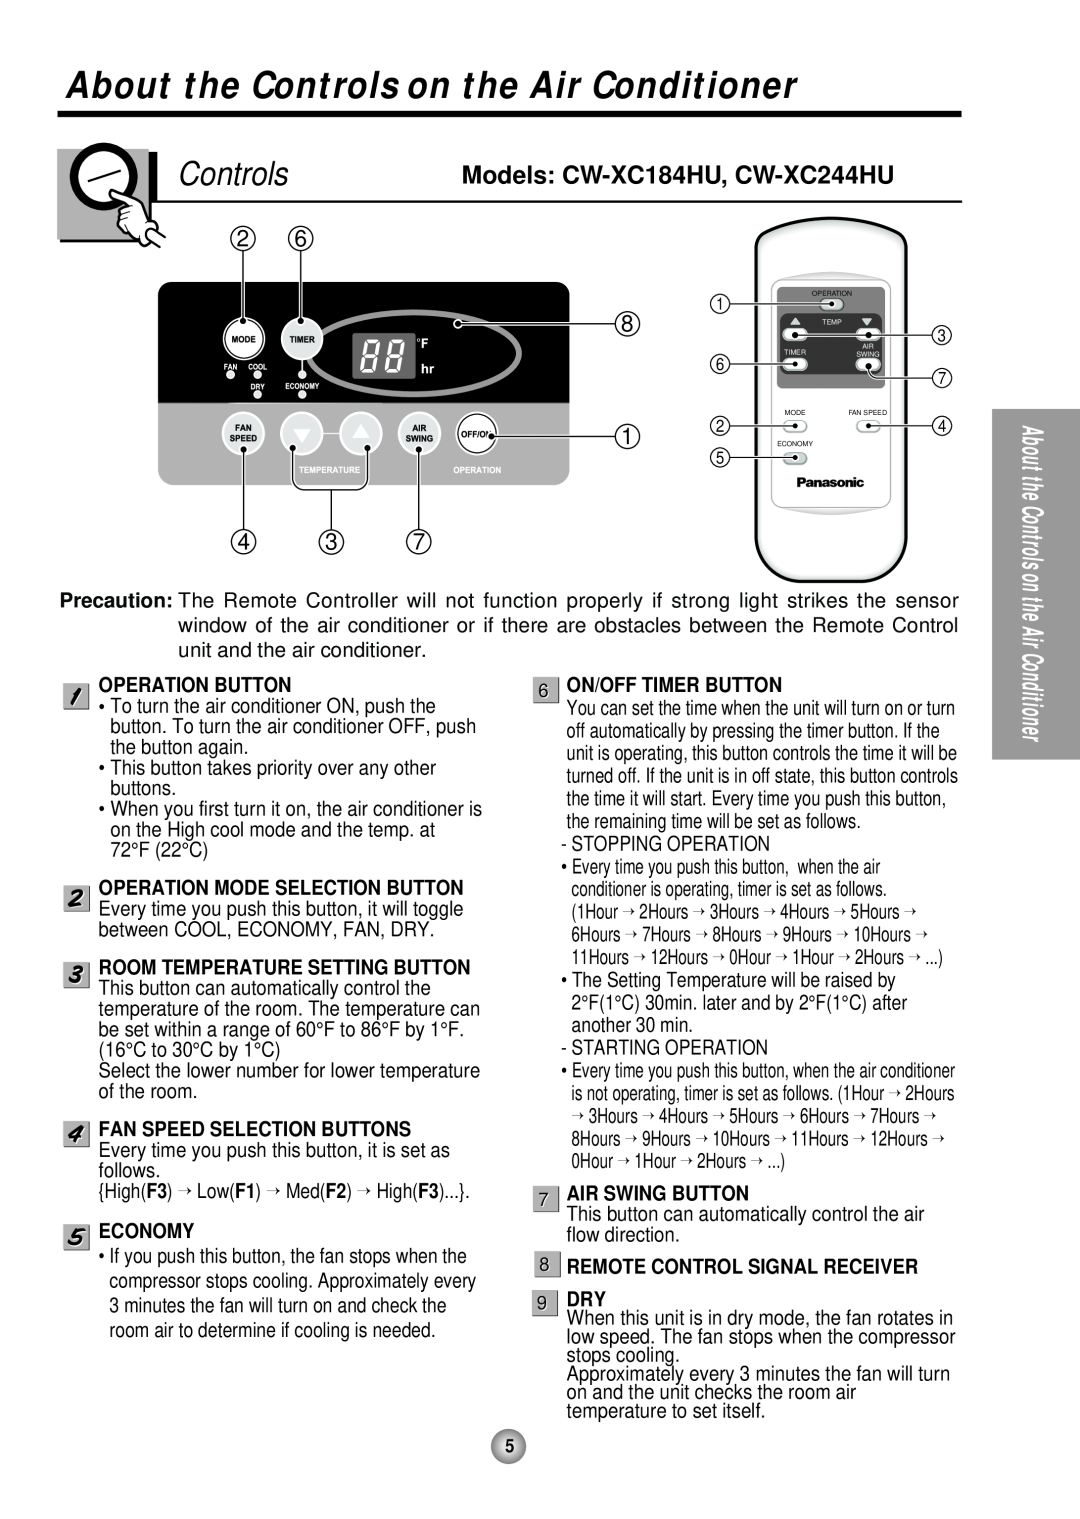 Panasonic manual About the Controls on the Air Conditioner, Models CW-XC184HU, CW-XC244HU, Operation Button, Economy 